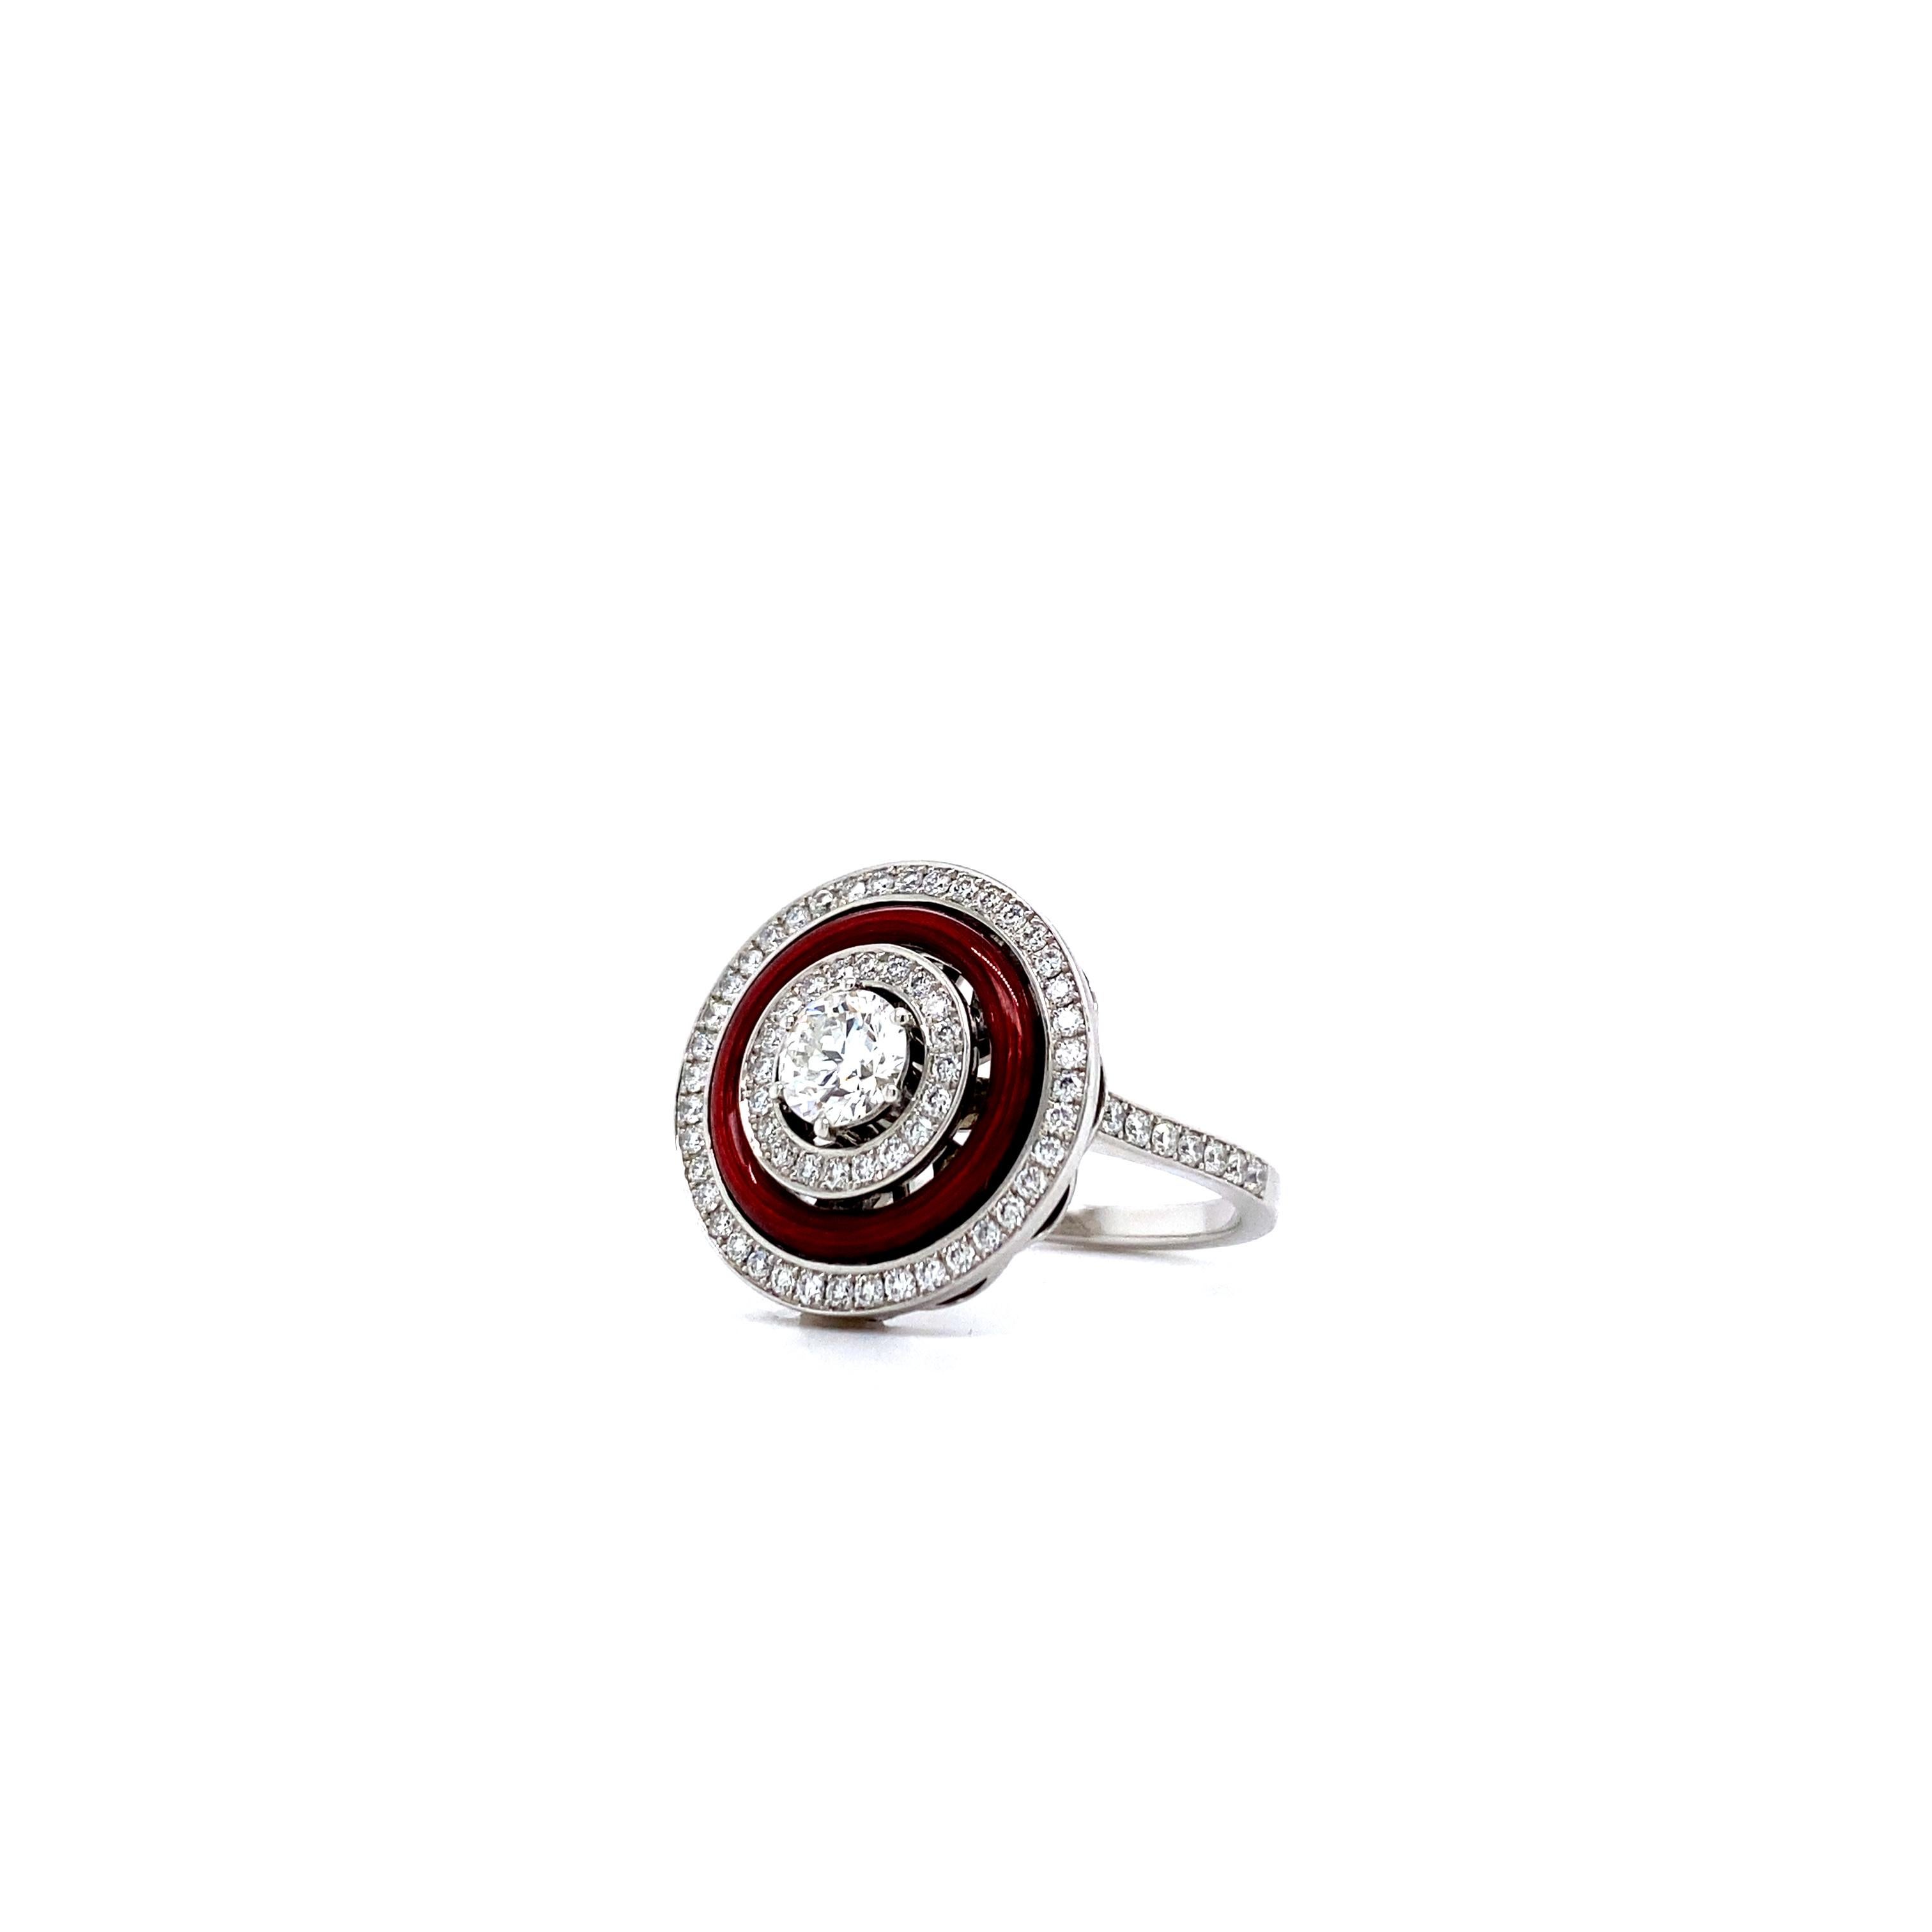 Victor Mayer Soirée Red Enamel Ring 18k White Gold/Yellow Gold with Diamonds For Sale 3